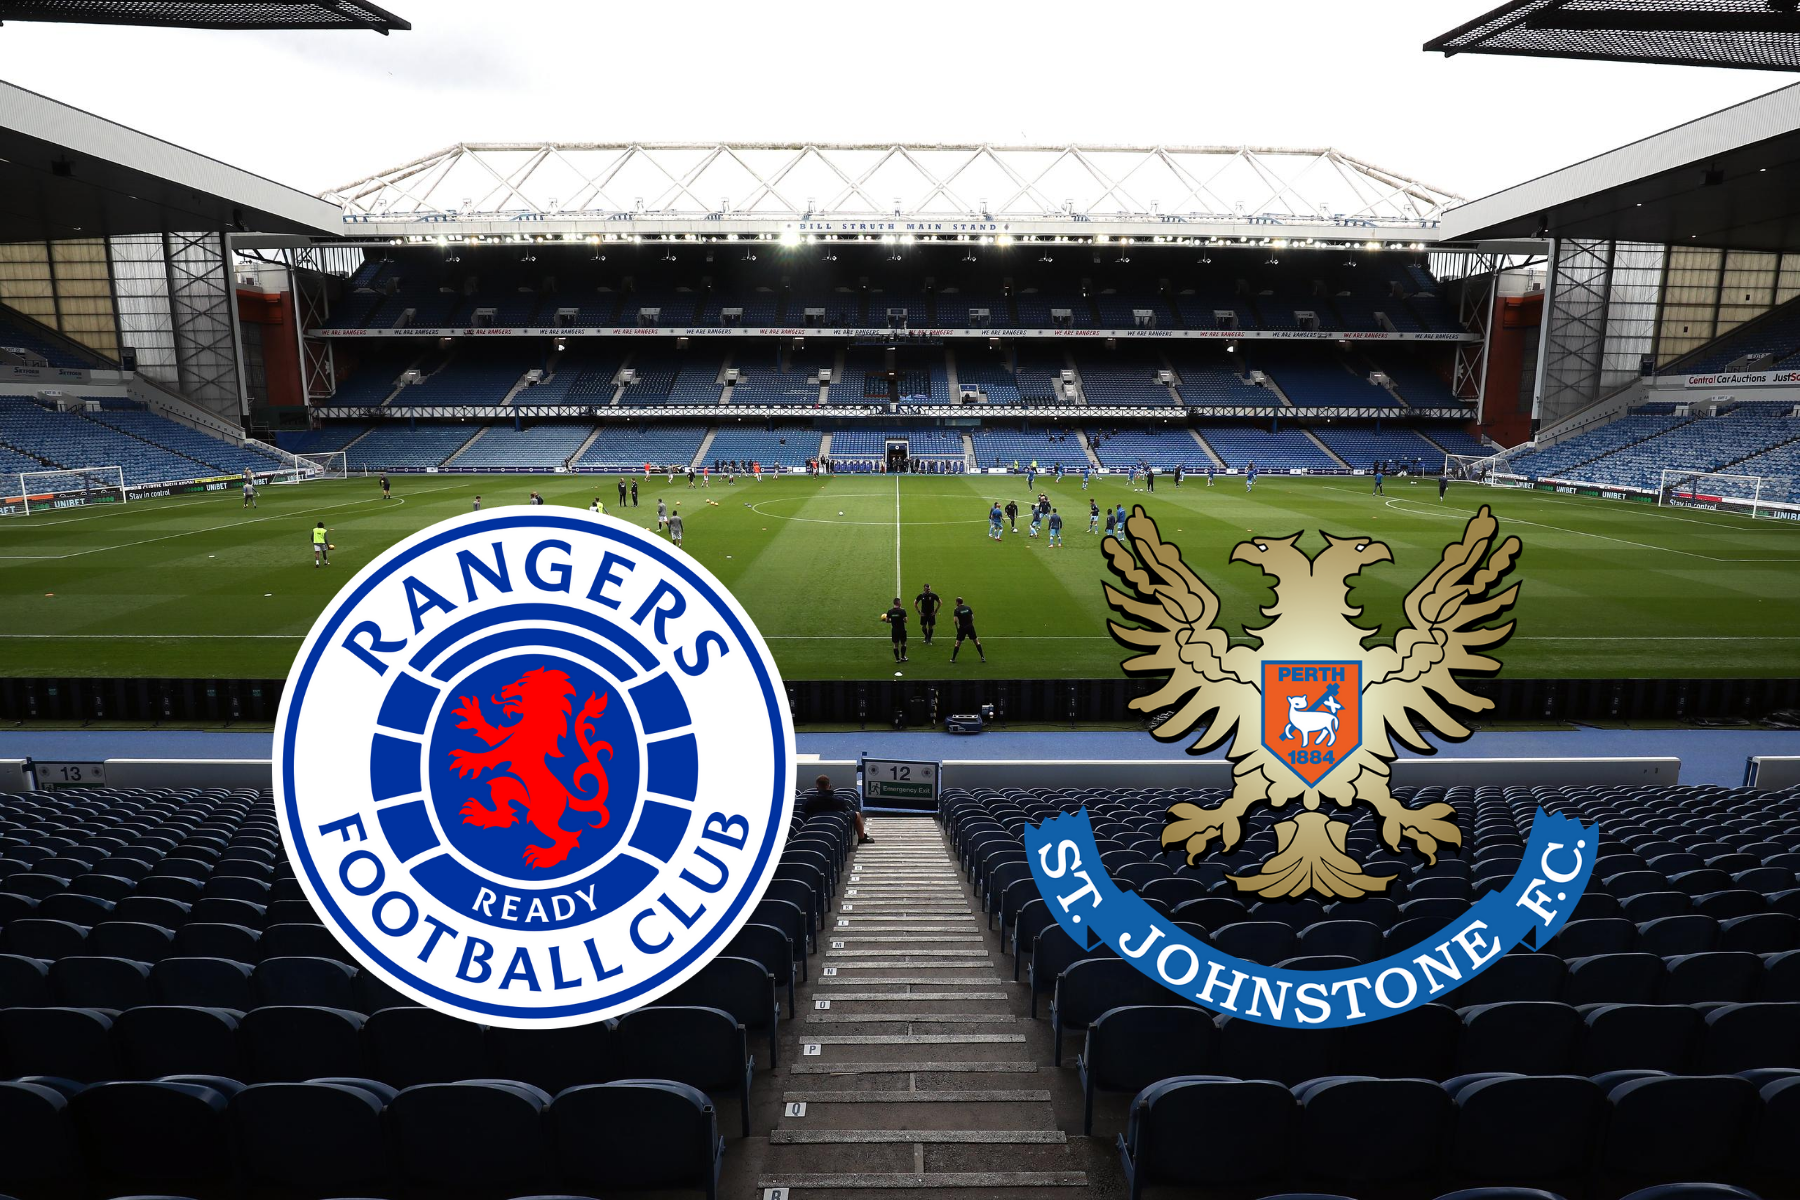 Rangers 3 St Johnstone 0 as it happened: Steven Gerrard's side cruise to victory as they hit top of Scottish Premiership